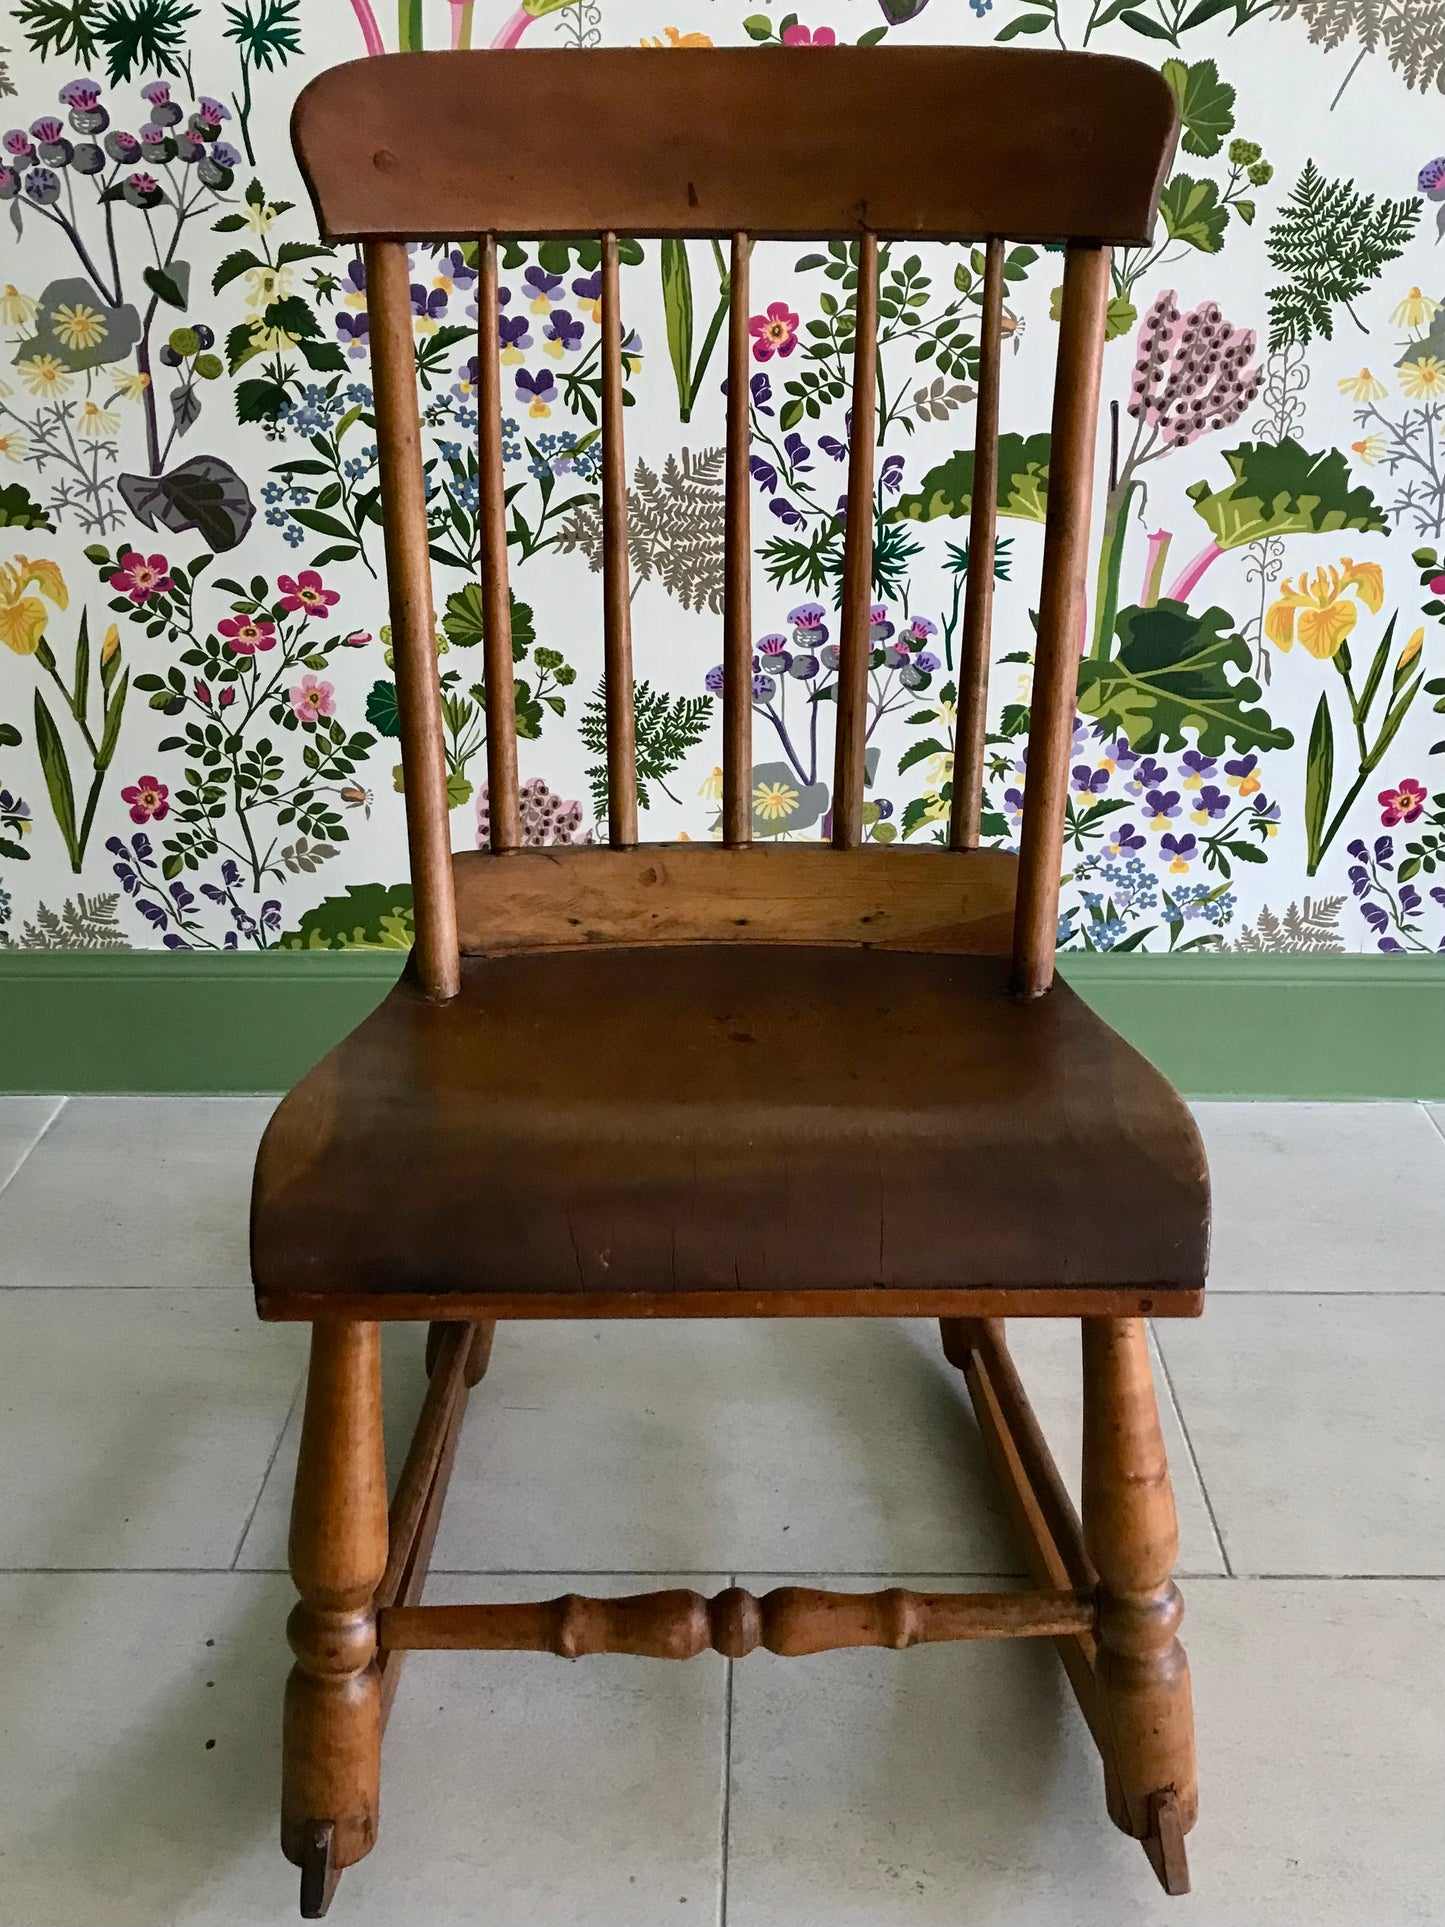 Vintage small wooden rocking chair